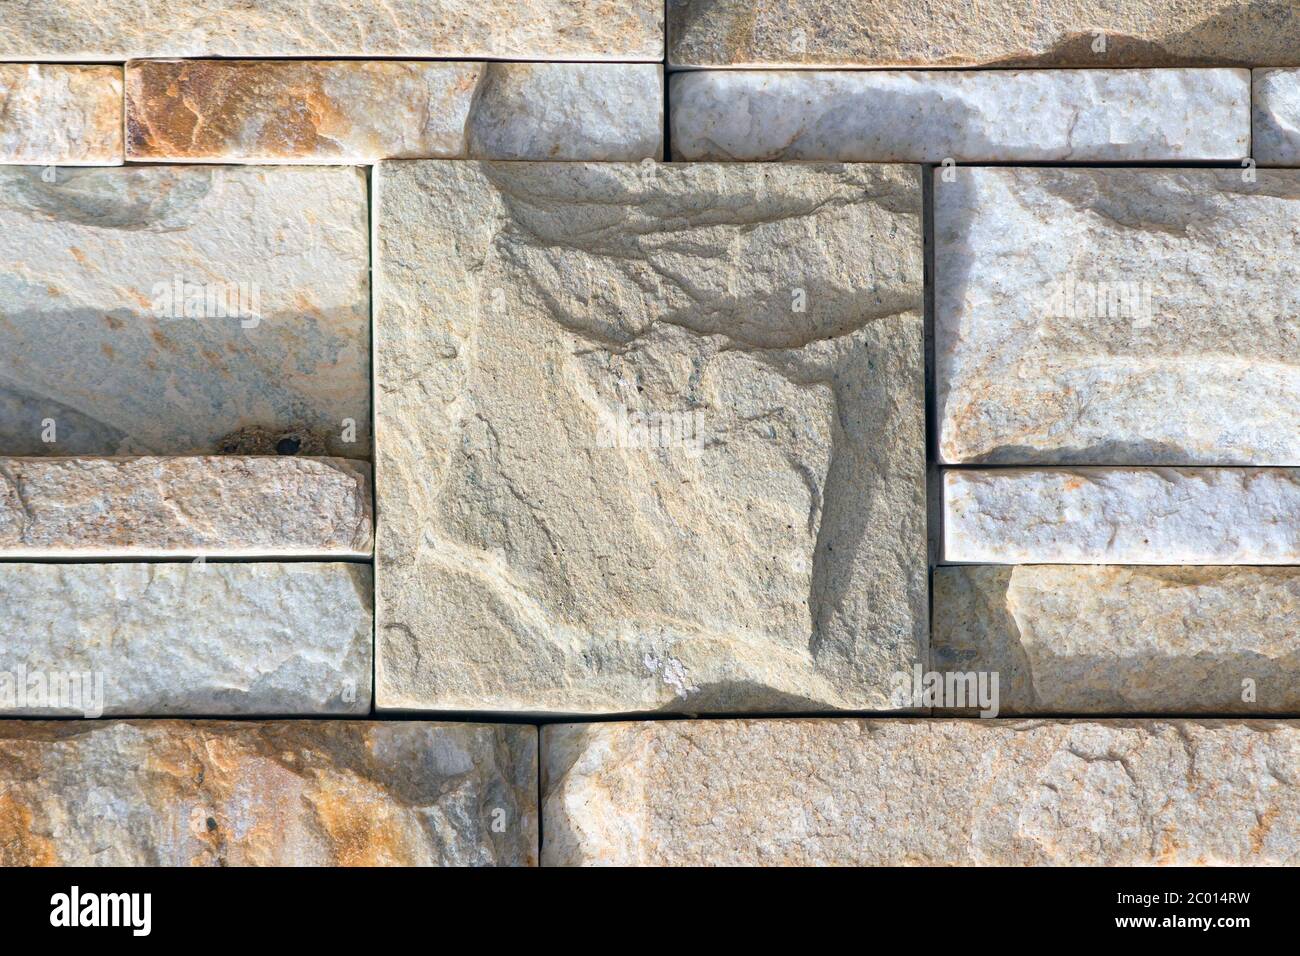 Center cuboid in a stone wall Stock Photo